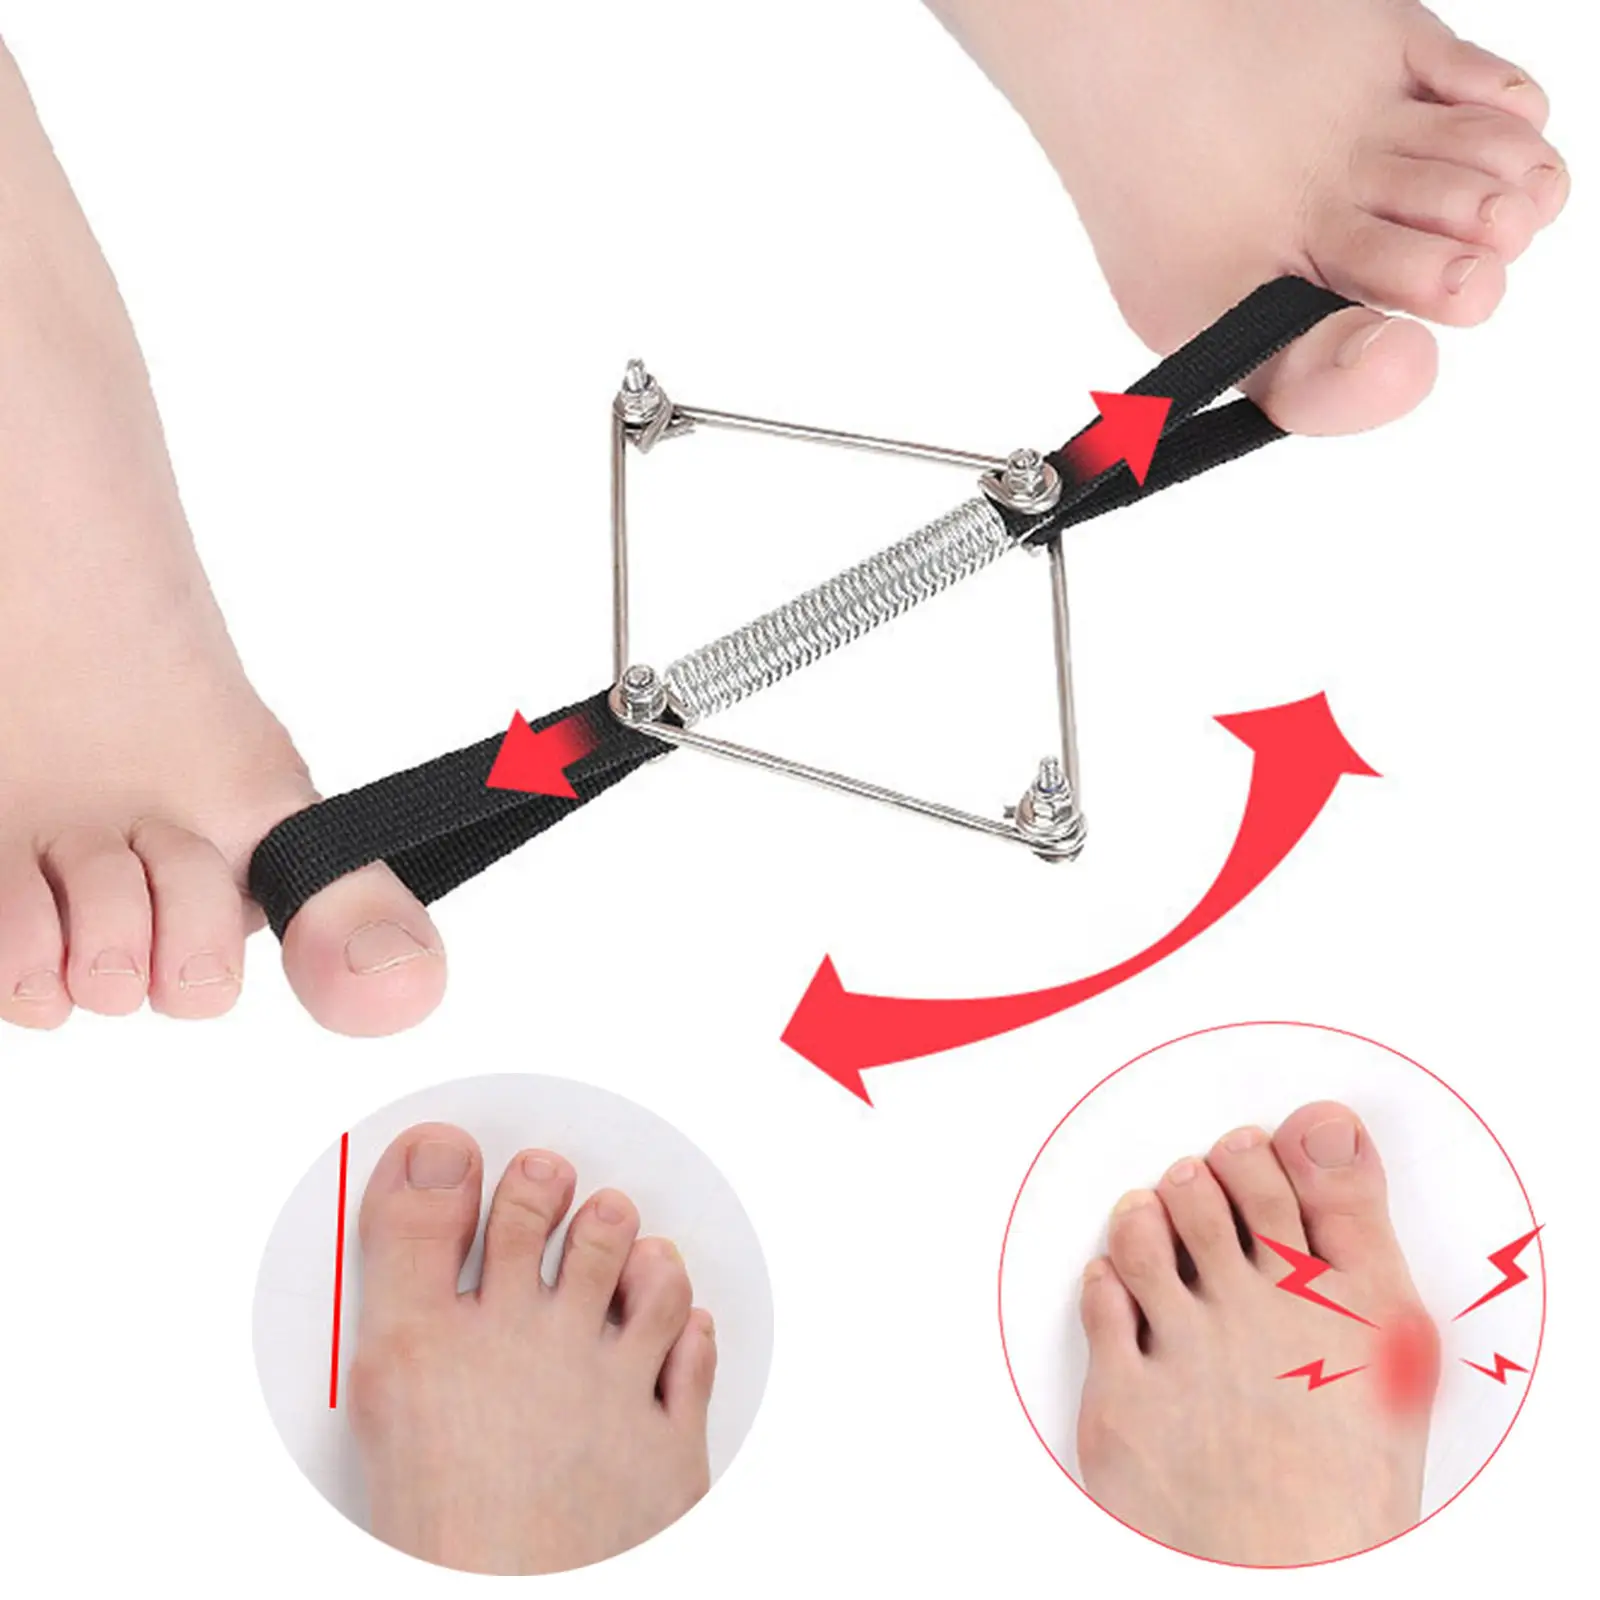 Bunion Corrector Nylon Steel Elastic Toe Exerciser Toe Stretcher for Hammer Toes Big Toe Joint Toe Alignment Foot Care